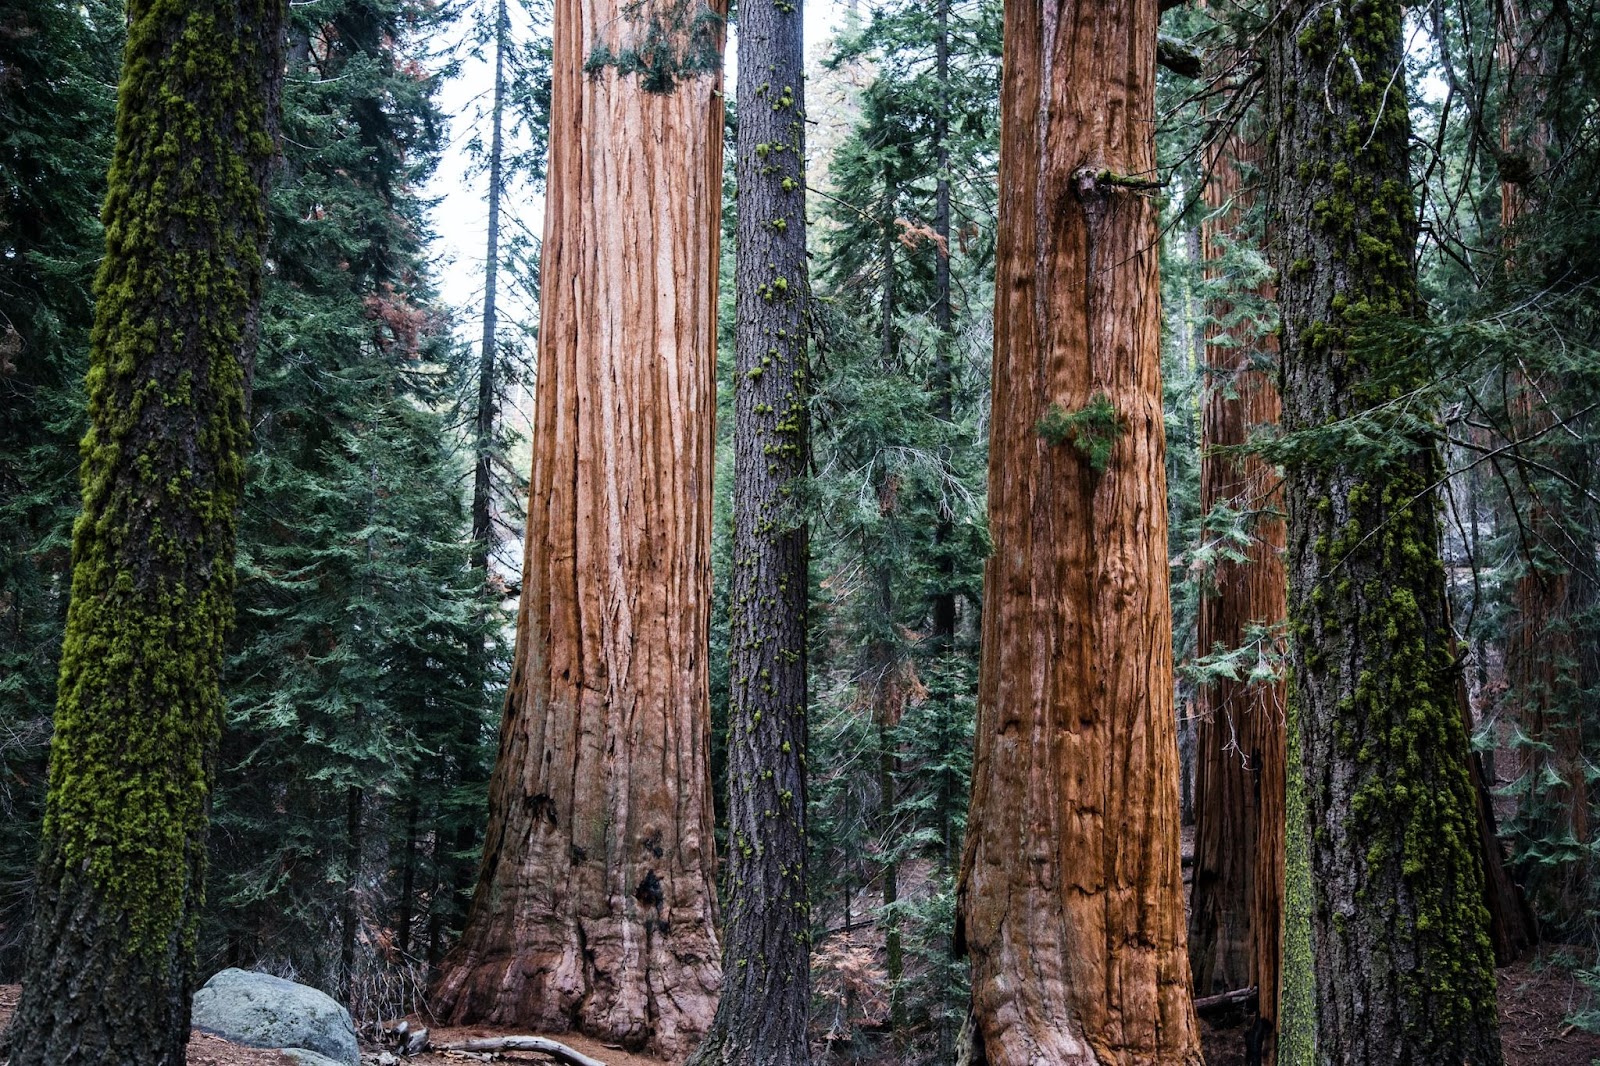 A close look at several large trees in Sequoia National Park